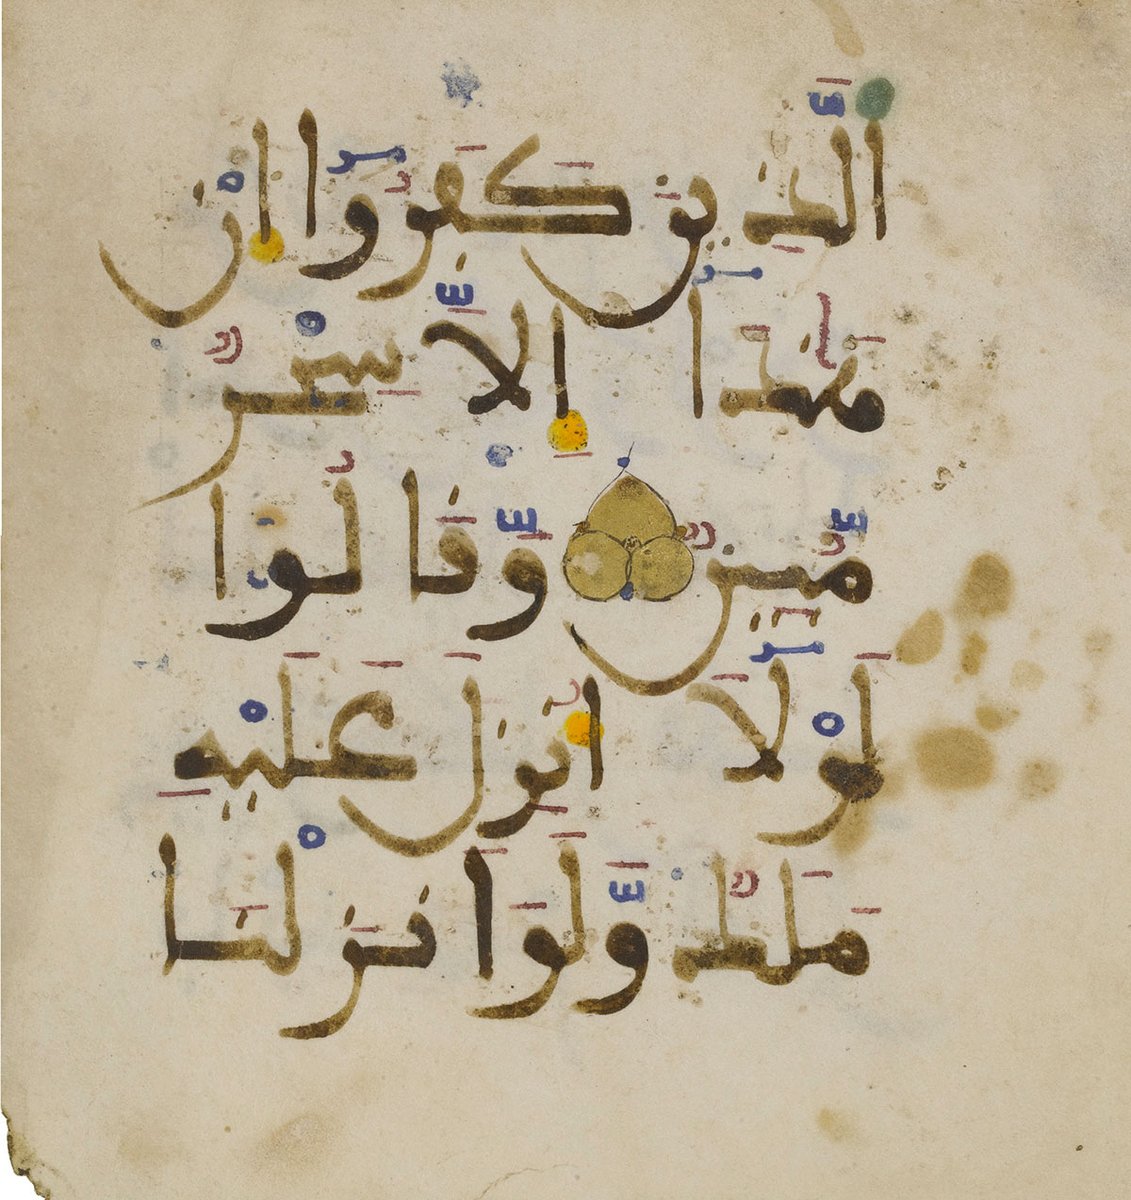 ground and painted directly with. So if we look again at this possibly-lapis Maghrebi page, it is actually possible that the blue is indigo. Only a larger painted surface would make it obvious (indigo is fairly opaque, and less vivid) other than a direct examination.